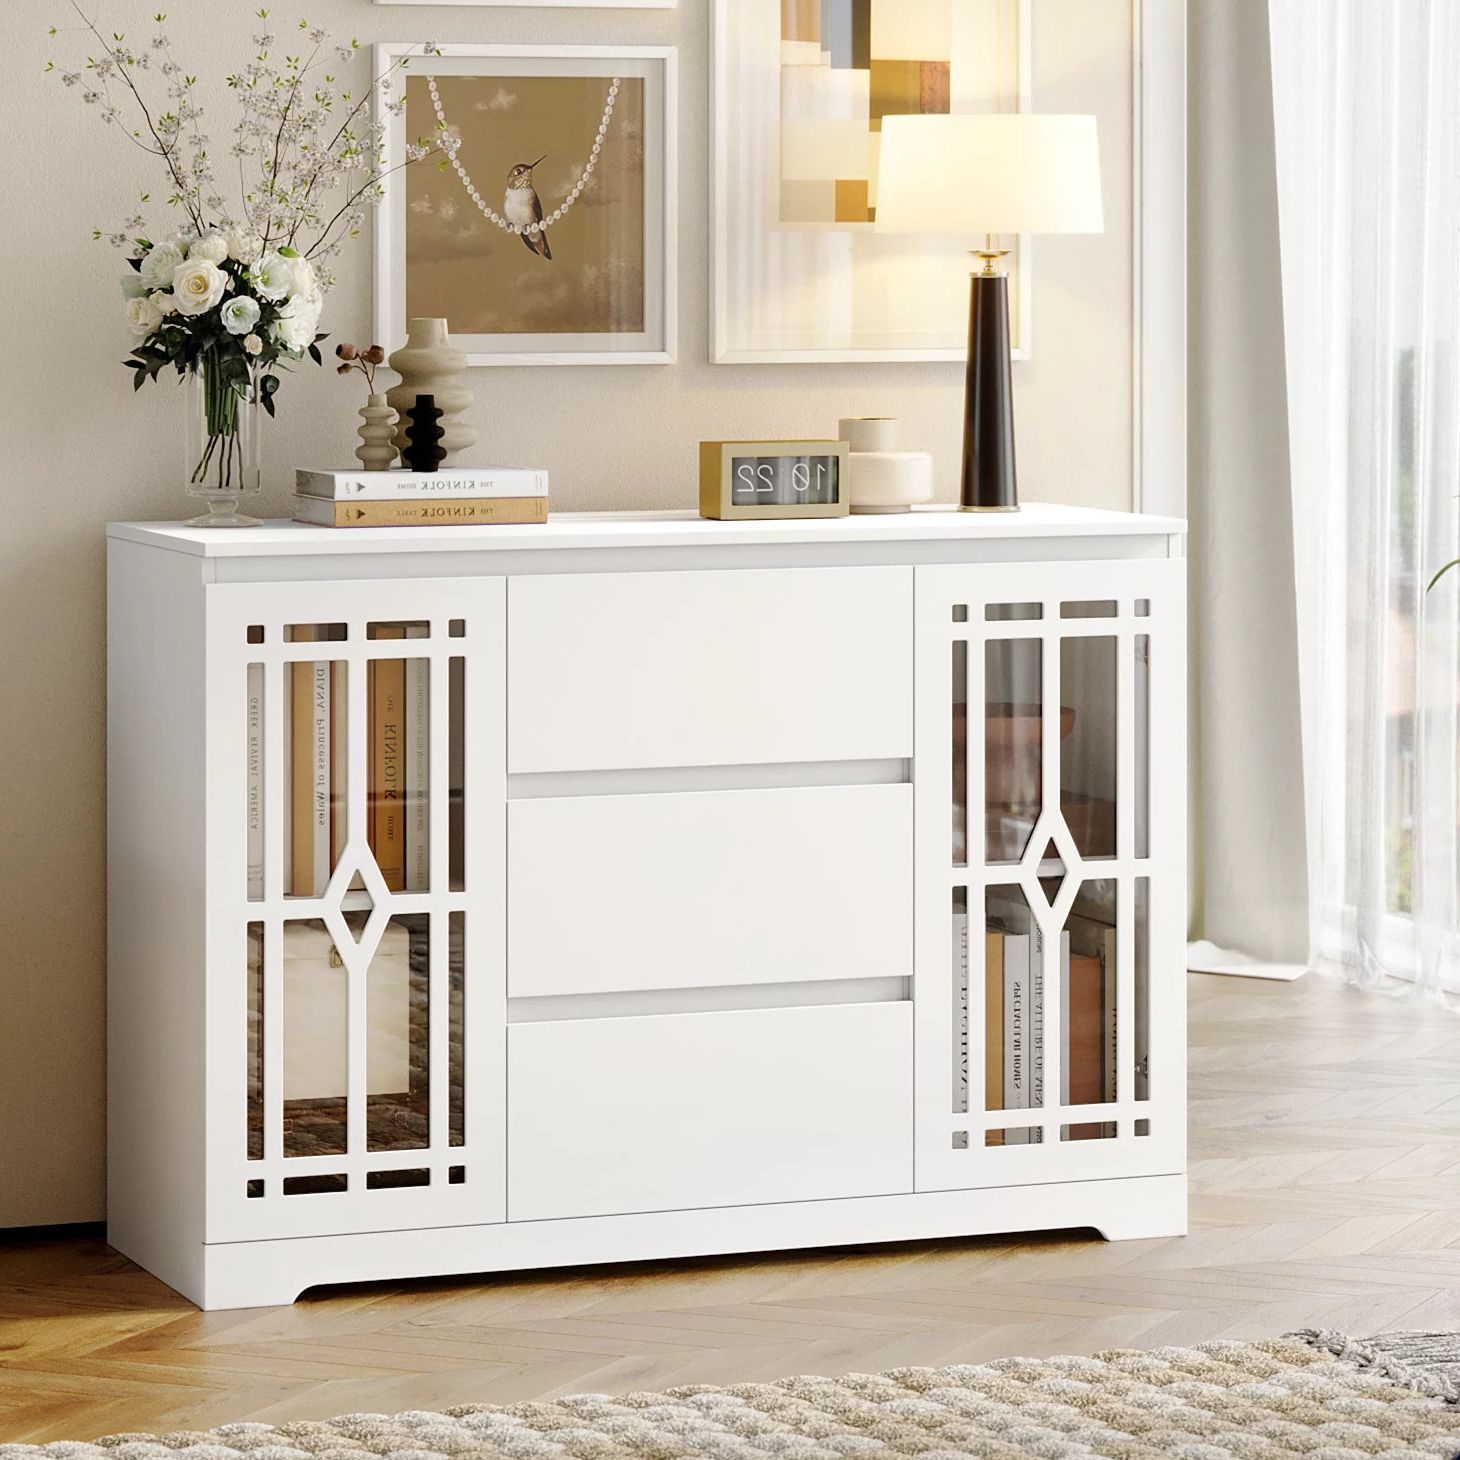 Ebern Designs Edurne 45.7" Wide 2 Door Sideboards With 3 Drawers, White |  Wayfair Pertaining To Sideboards With 3 Drawers (Gallery 8 of 20)